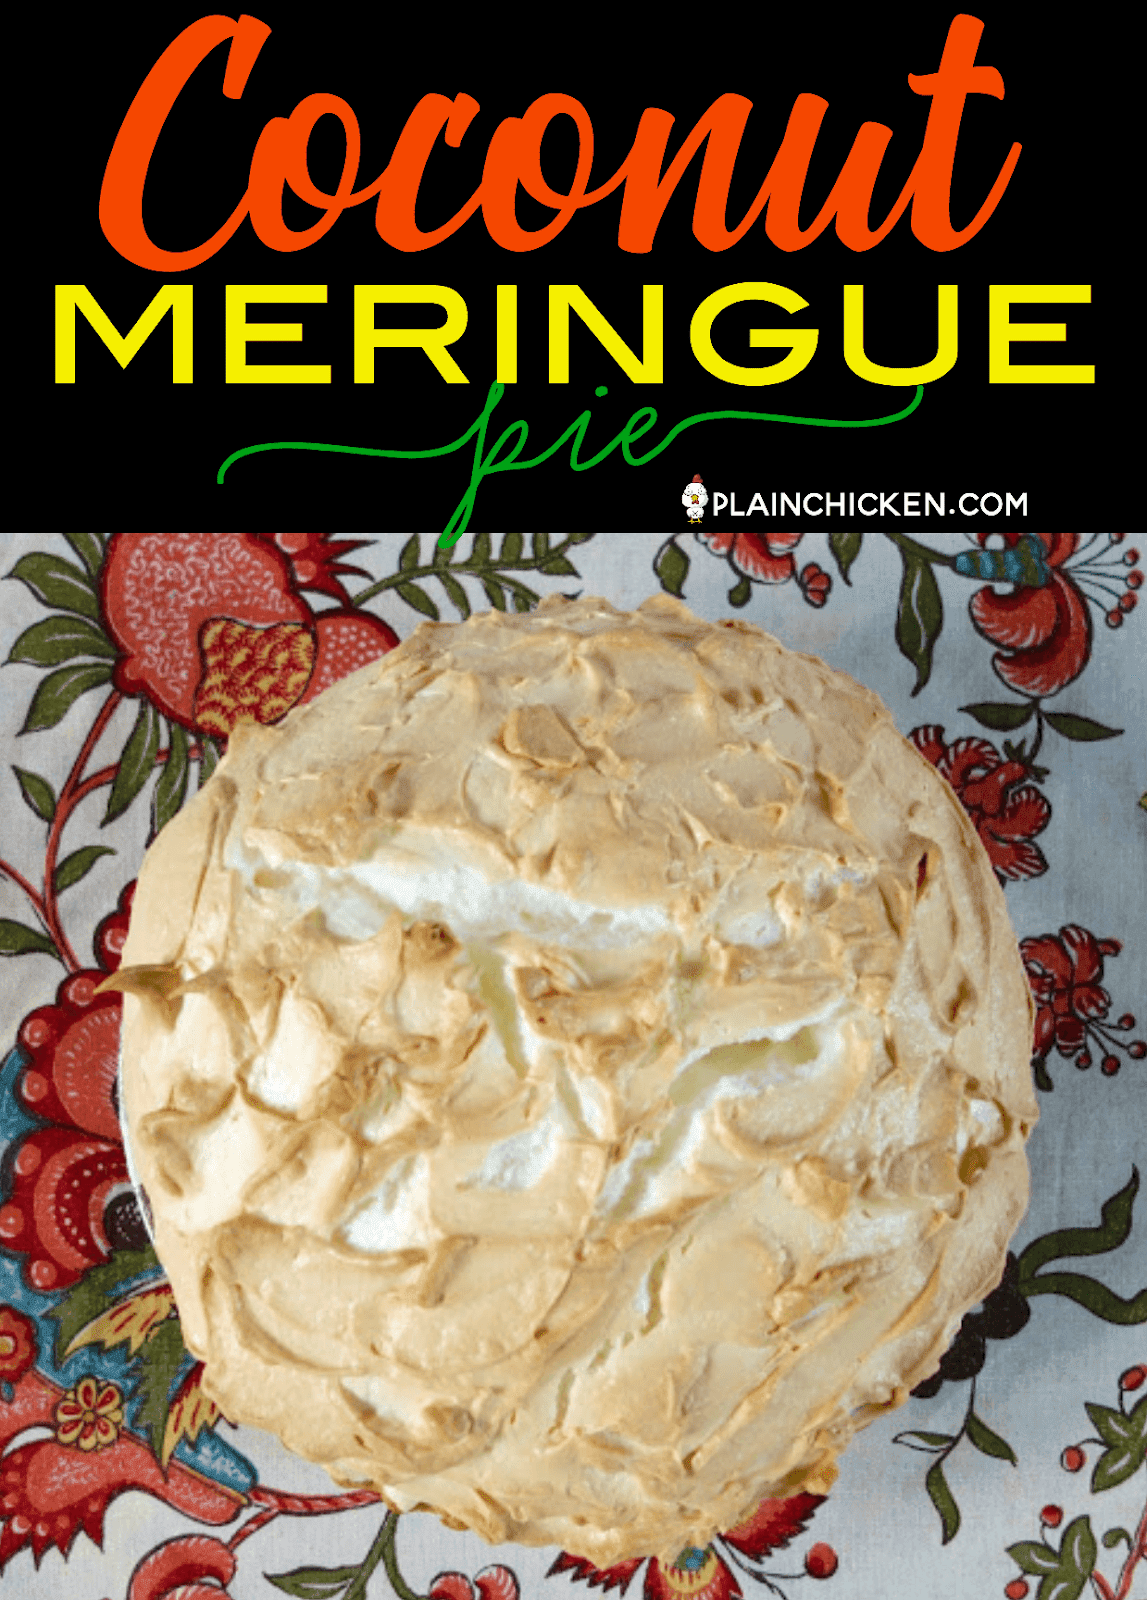 Coconut Meringue Pie - hands down the BEST coconut pie we've ever eaten! SO easy to make and it tastes amazing!!! Great for parties and and the holidays! Coconut, sugar, cornstarch, salt, milk, eggs, butter, corn syrup, vanilla, pie crust, cream of tarter. Can make the day before and refrigerate until serving. #pie #coconut